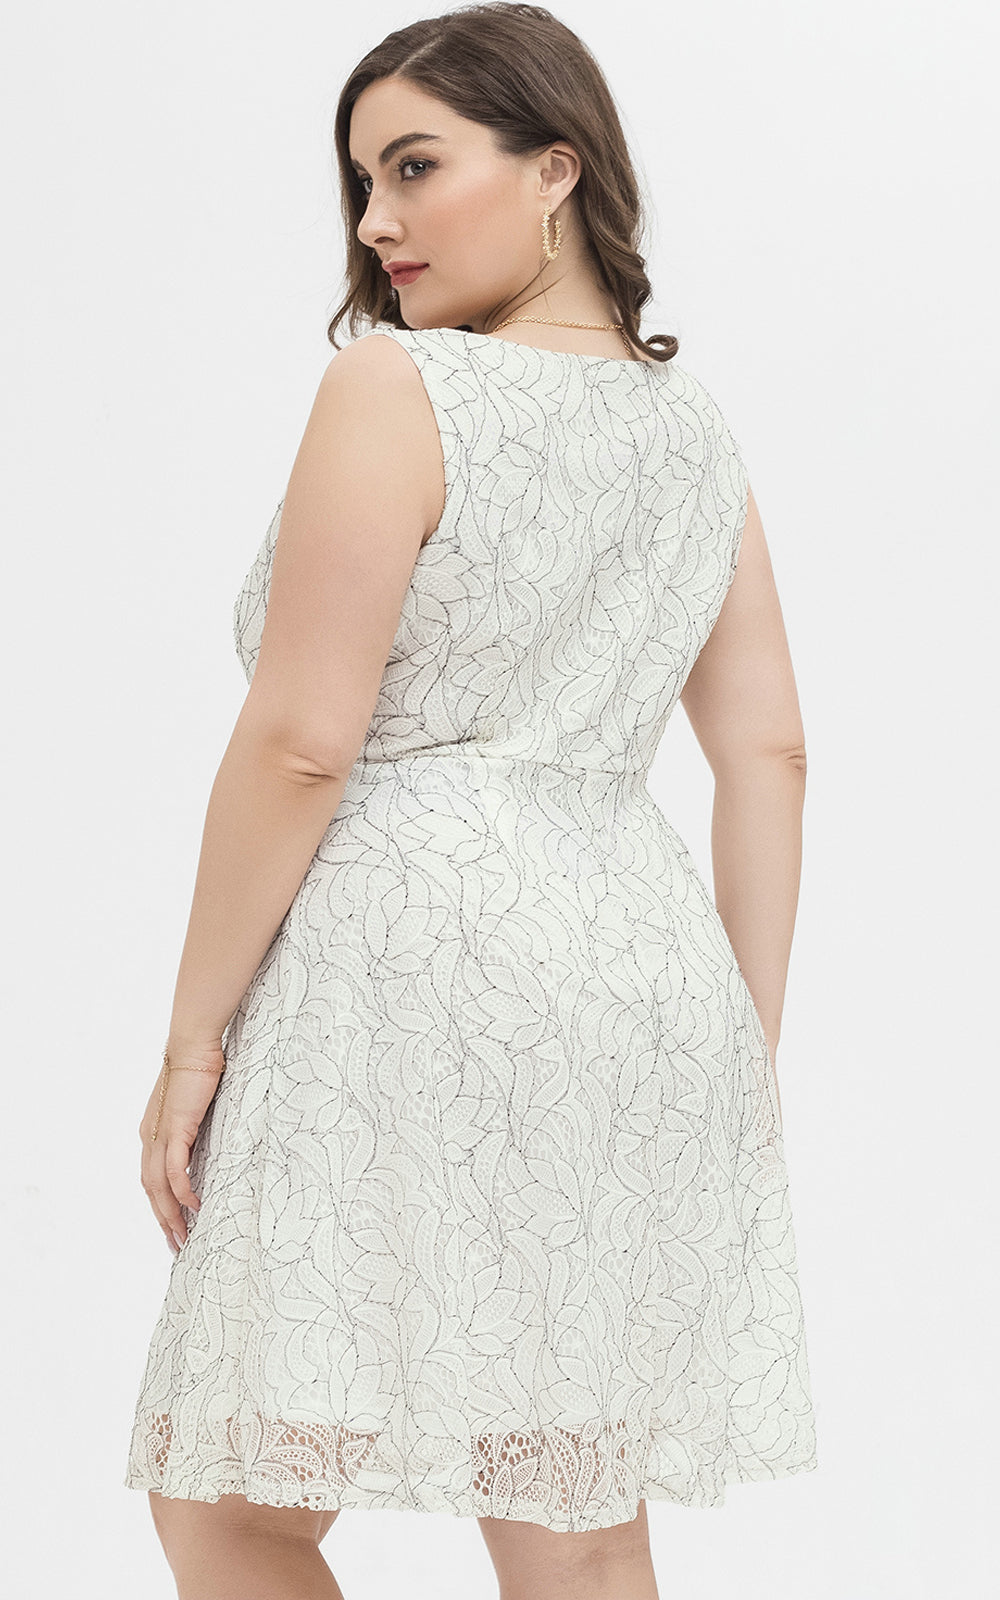 Women Plus Size Ivory Floral Lace Fit and Flare Cocktail Party Dress for Wedding Guest